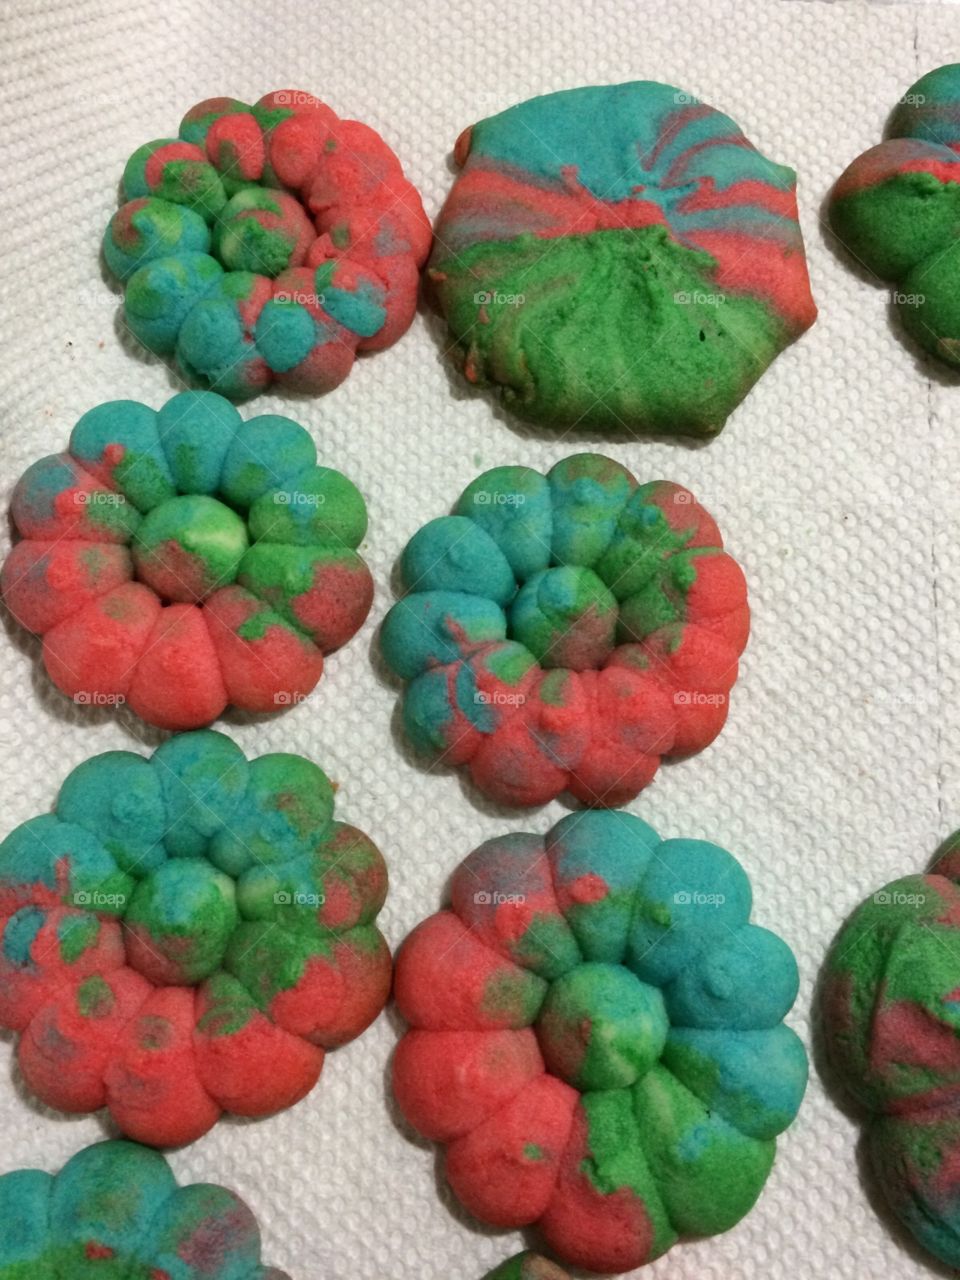 coloring biscuits. a delicious coloring biscuits for snakes